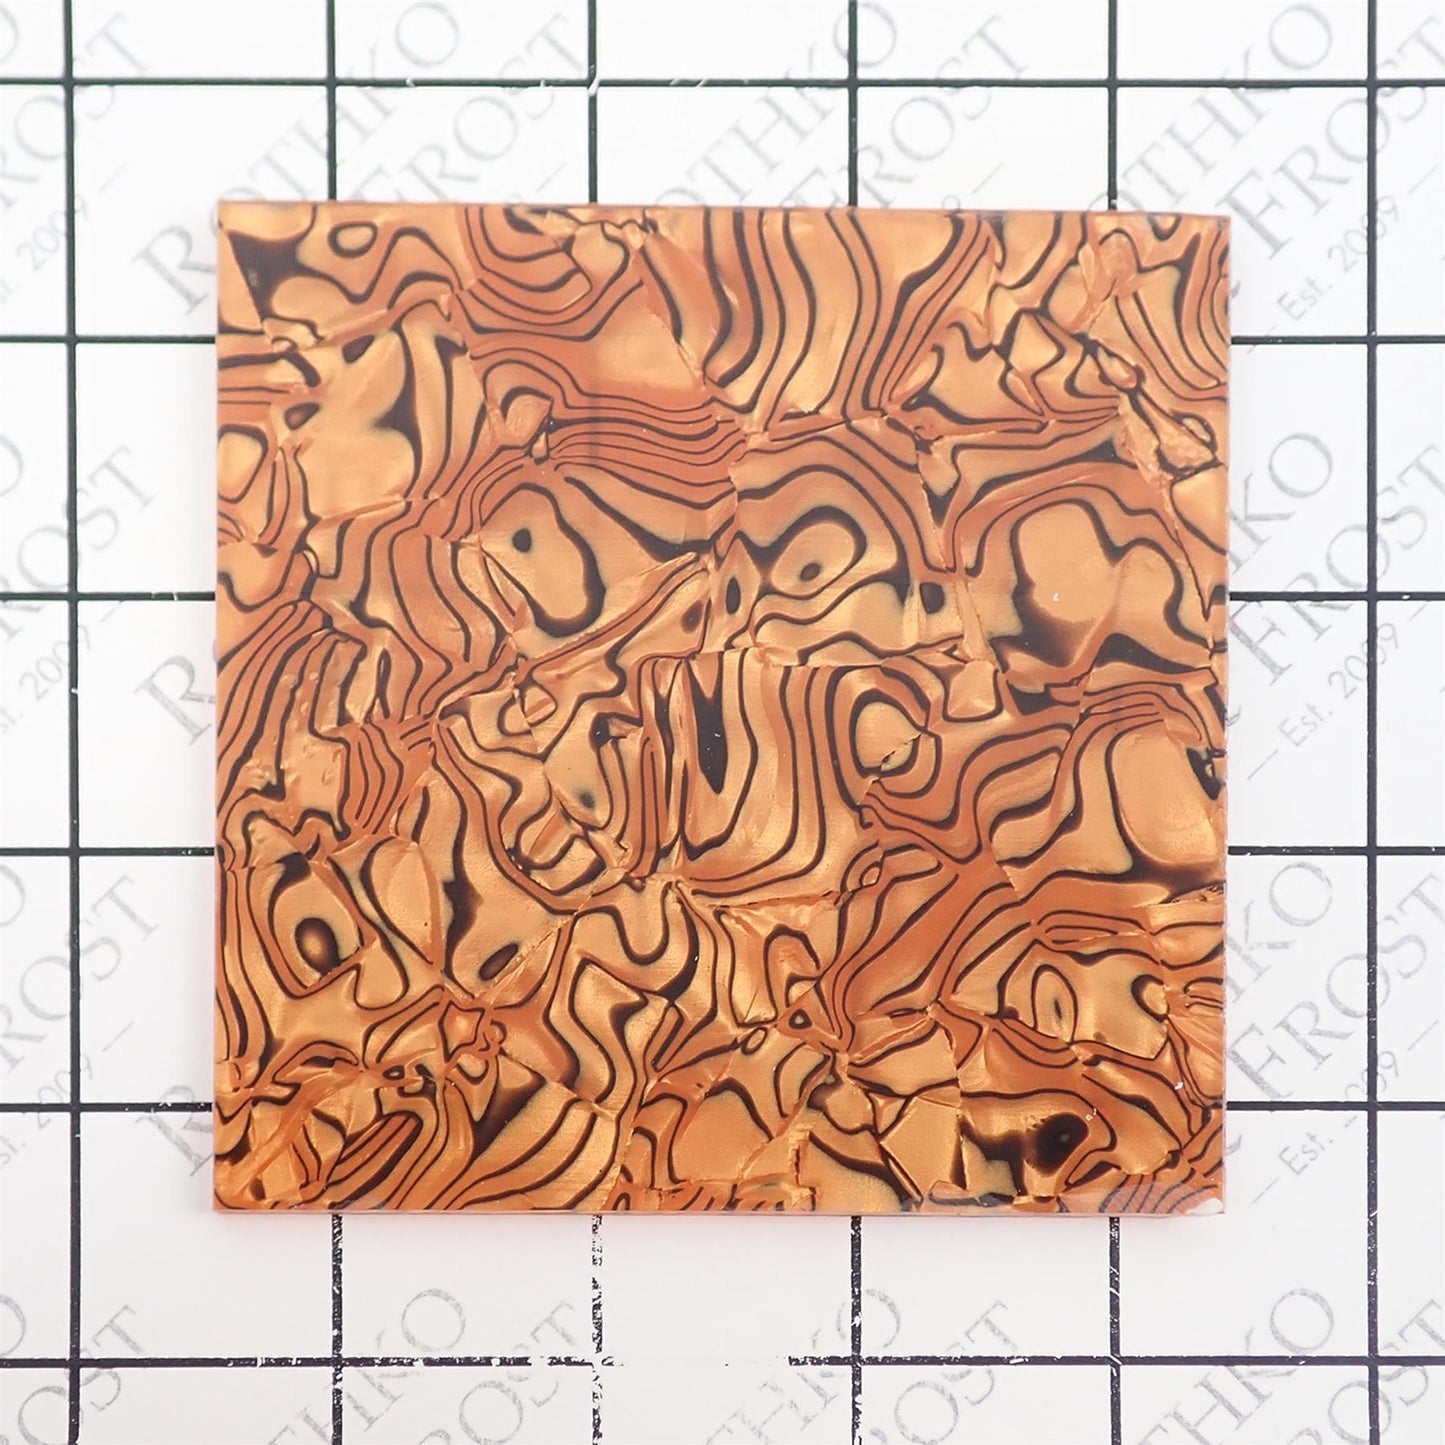 Incudo Brown Tiger Shell Celluloid Laminate Acrylic Sheet - 300x200x3mm (11.8x7.87x0.12")